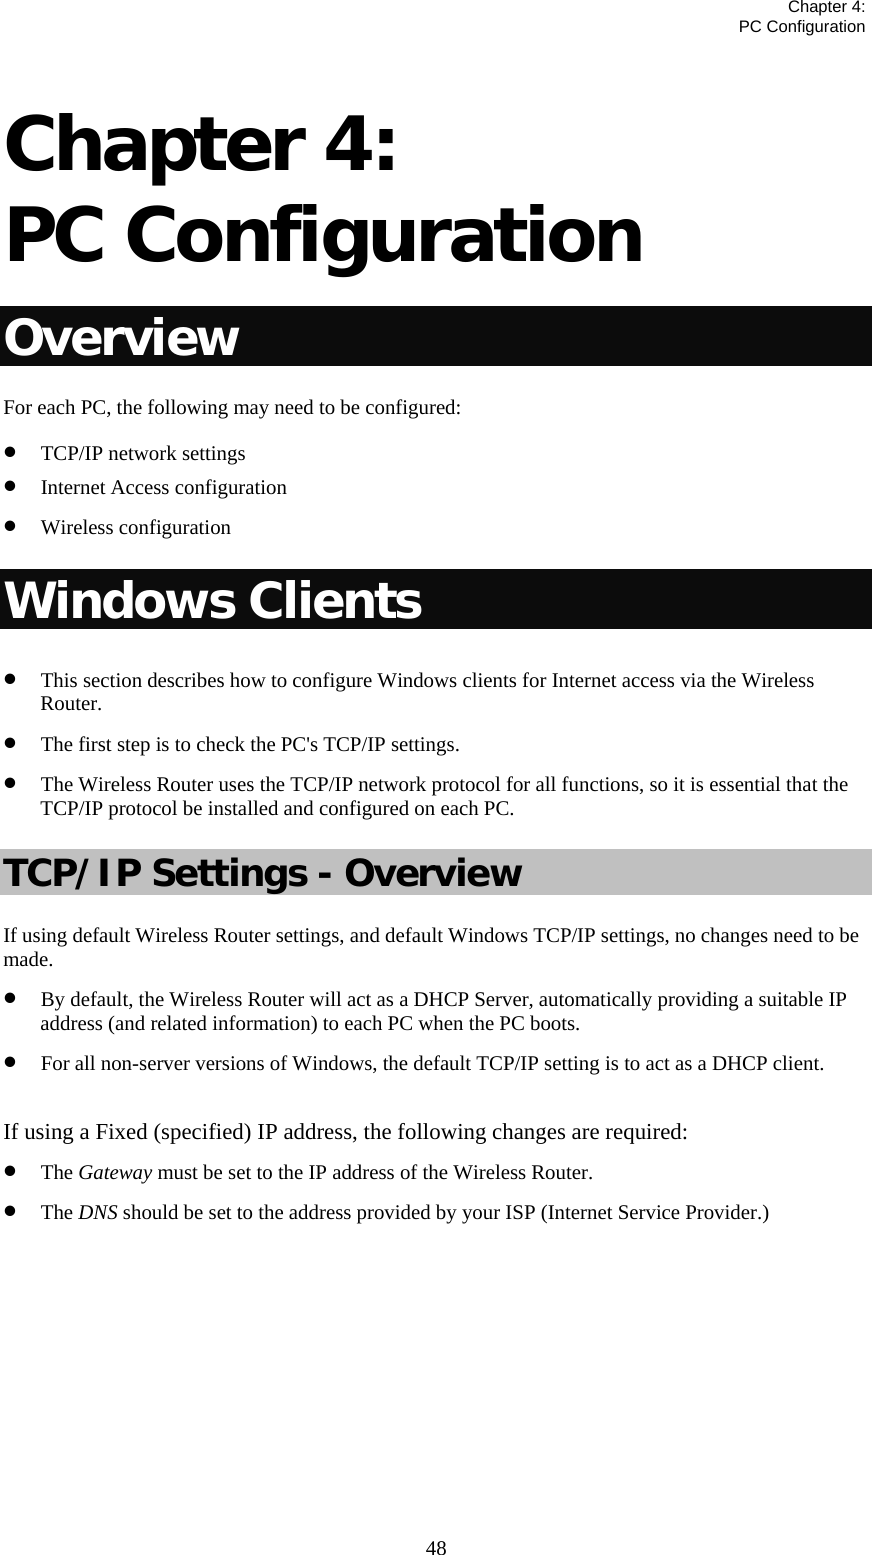   Chapter 4:  PC Configuration  48 Chapter 4:  PC Configuration Overview For each PC, the following may need to be configured: • TCP/IP network settings • Internet Access configuration • Wireless configuration Windows Clients • This section describes how to configure Windows clients for Internet access via the Wireless Router. • The first step is to check the PC&apos;s TCP/IP settings. • The Wireless Router uses the TCP/IP network protocol for all functions, so it is essential that the TCP/IP protocol be installed and configured on each PC. TCP/IP Settings - Overview If using default Wireless Router settings, and default Windows TCP/IP settings, no changes need to be made. • By default, the Wireless Router will act as a DHCP Server, automatically providing a suitable IP address (and related information) to each PC when the PC boots. • For all non-server versions of Windows, the default TCP/IP setting is to act as a DHCP client.  If using a Fixed (specified) IP address, the following changes are required: • The Gateway must be set to the IP address of the Wireless Router. • The DNS should be set to the address provided by your ISP (Internet Service Provider.)        